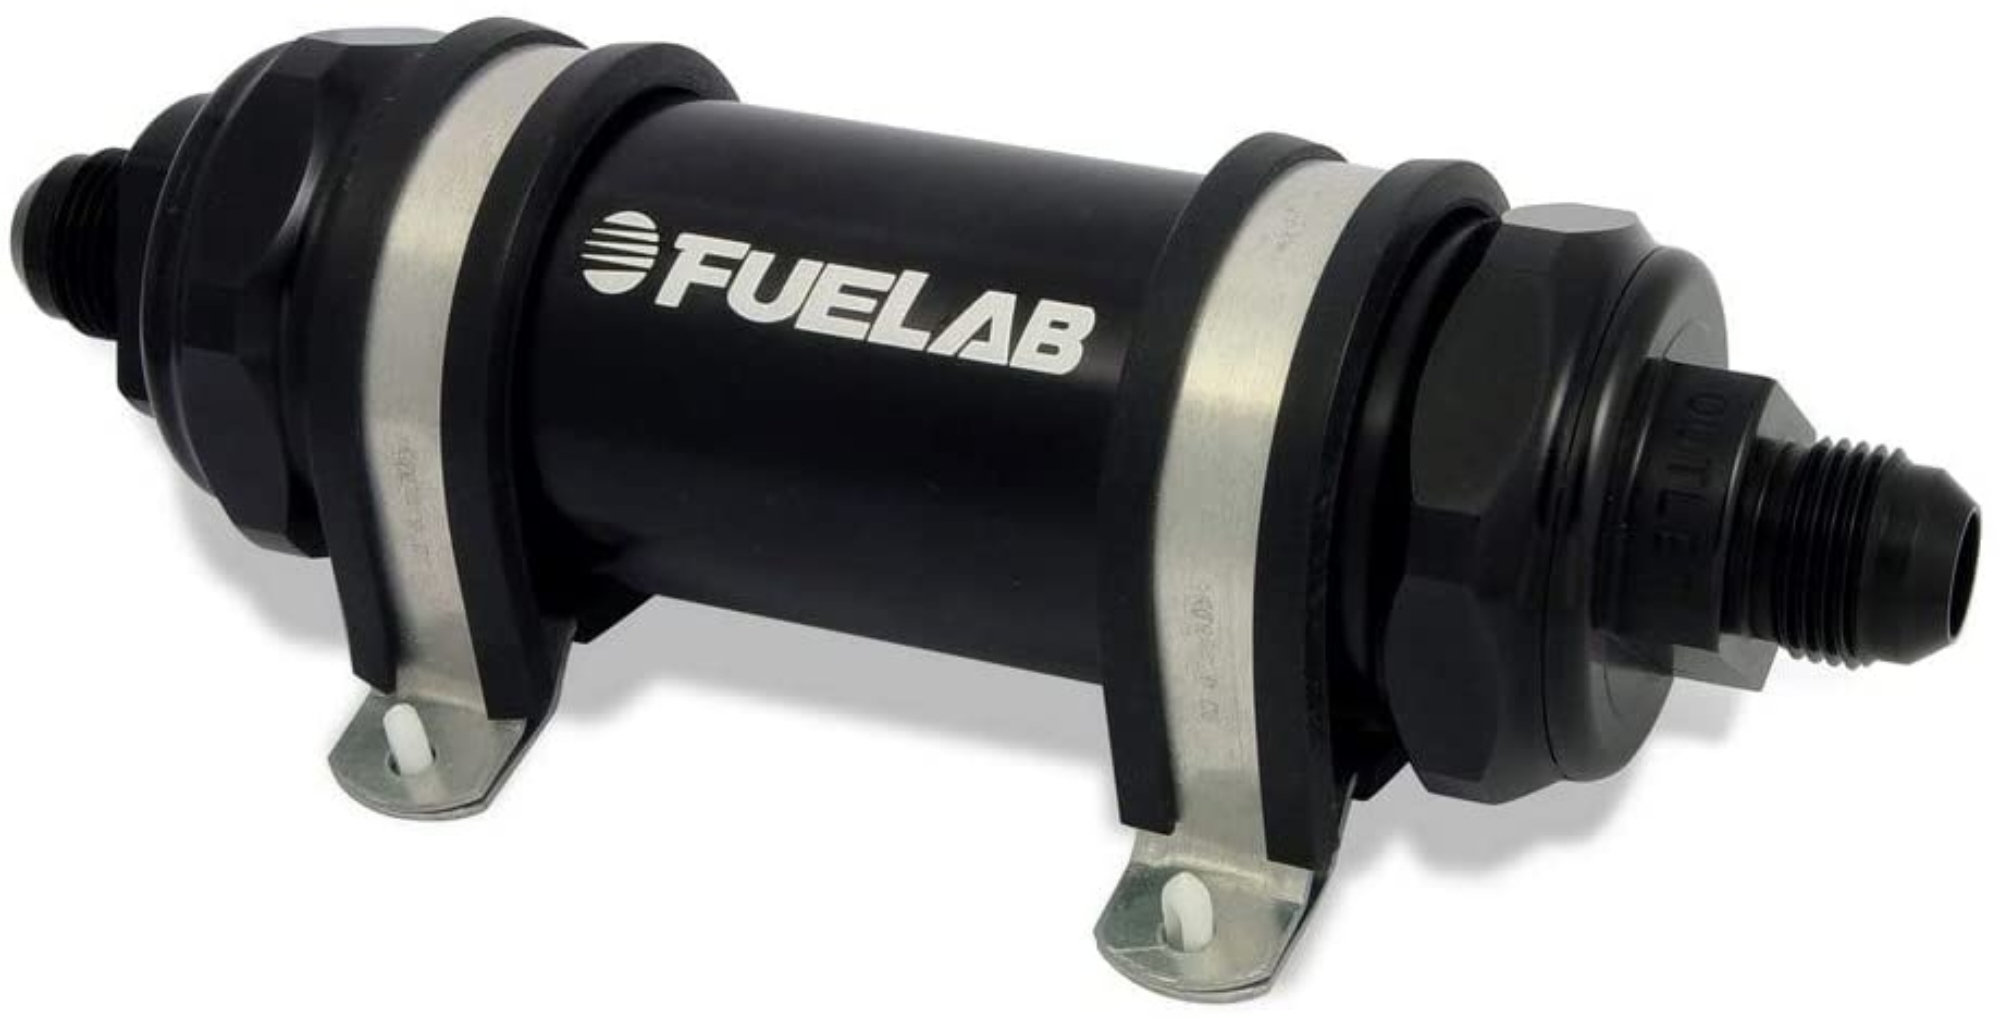 FueLab 82823-1 Fuel Filter, In-Line, 100 Micron, 5 in Stainless Element, 10 AN Male Inlet, 10 AN Male Outlet, Aluminum, Black Anodized, Each